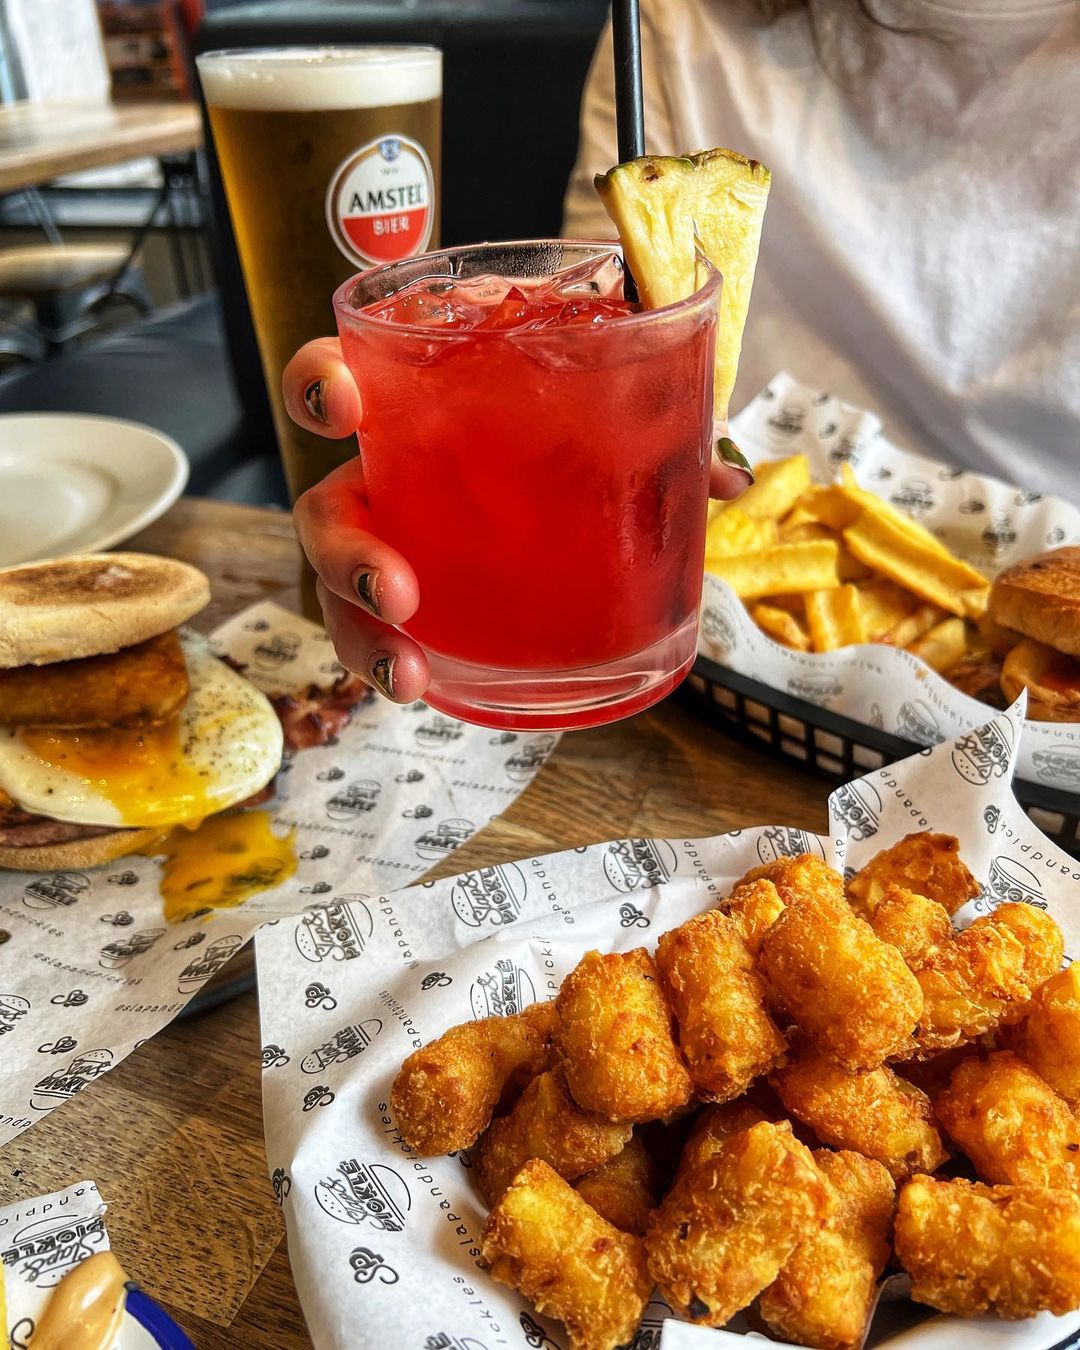 tater tots with a person holding a red cocktail with a pineapple stick in it over the top. There is a burger and chips in the background.